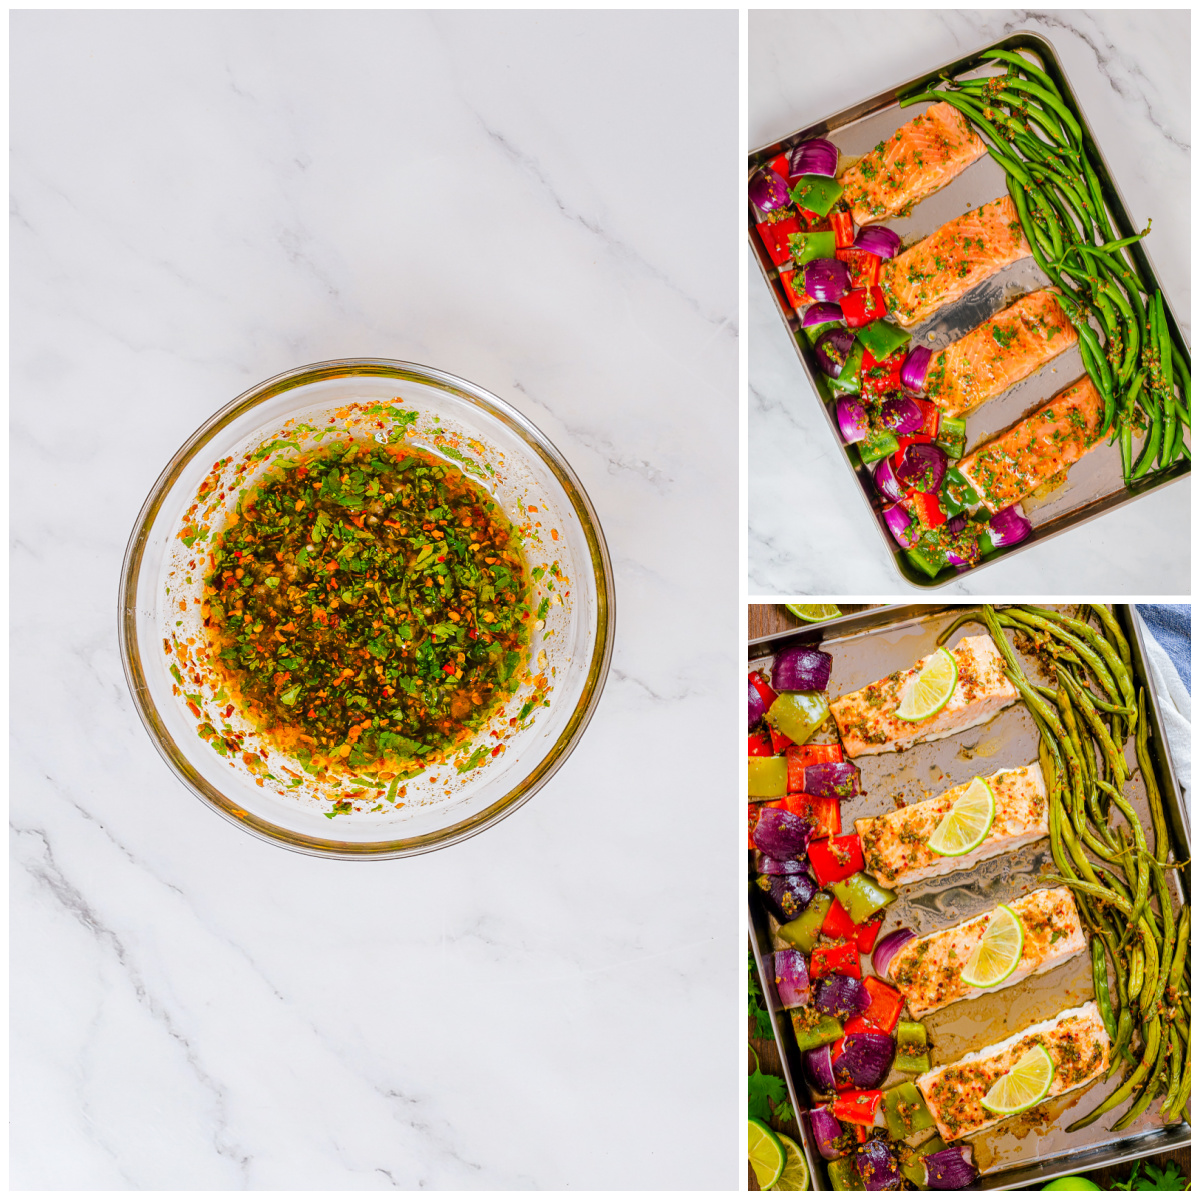 Step by step photos on how to make a Salmon Sheet Pan Dinner.